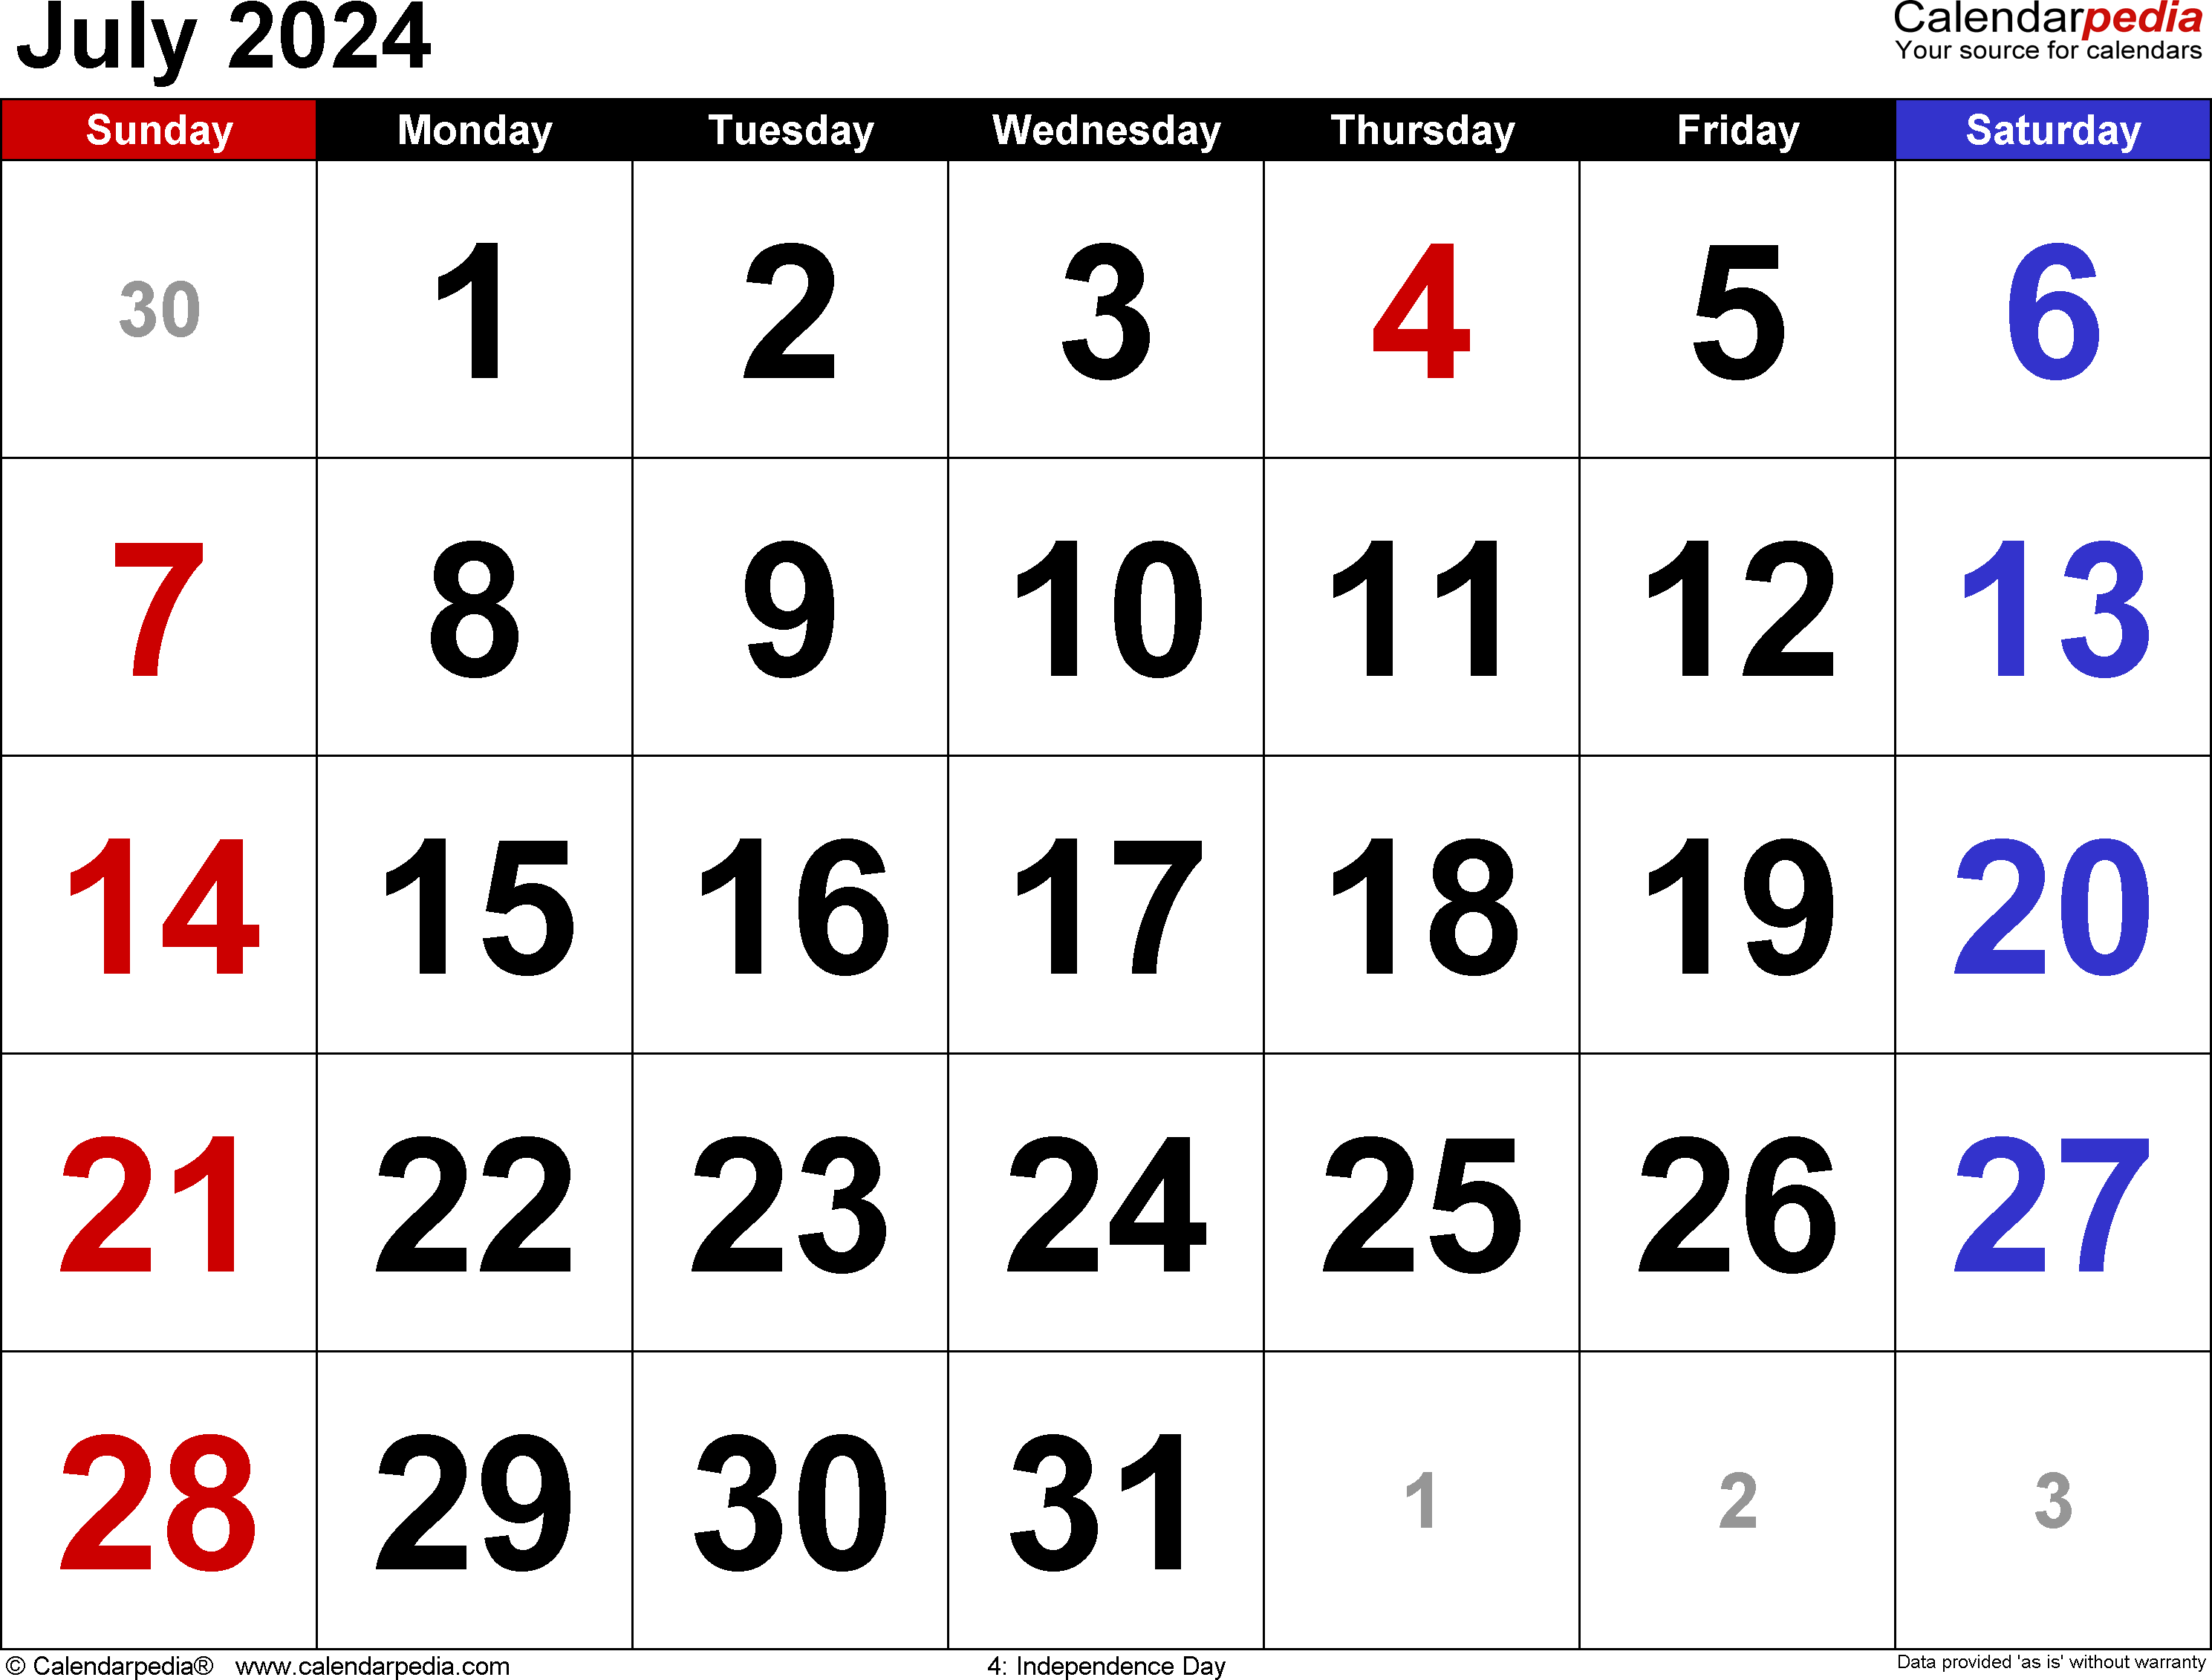 July 2024 Calendar | Templates For Word, Excel And Pdf within July 2024 Calendar Excel